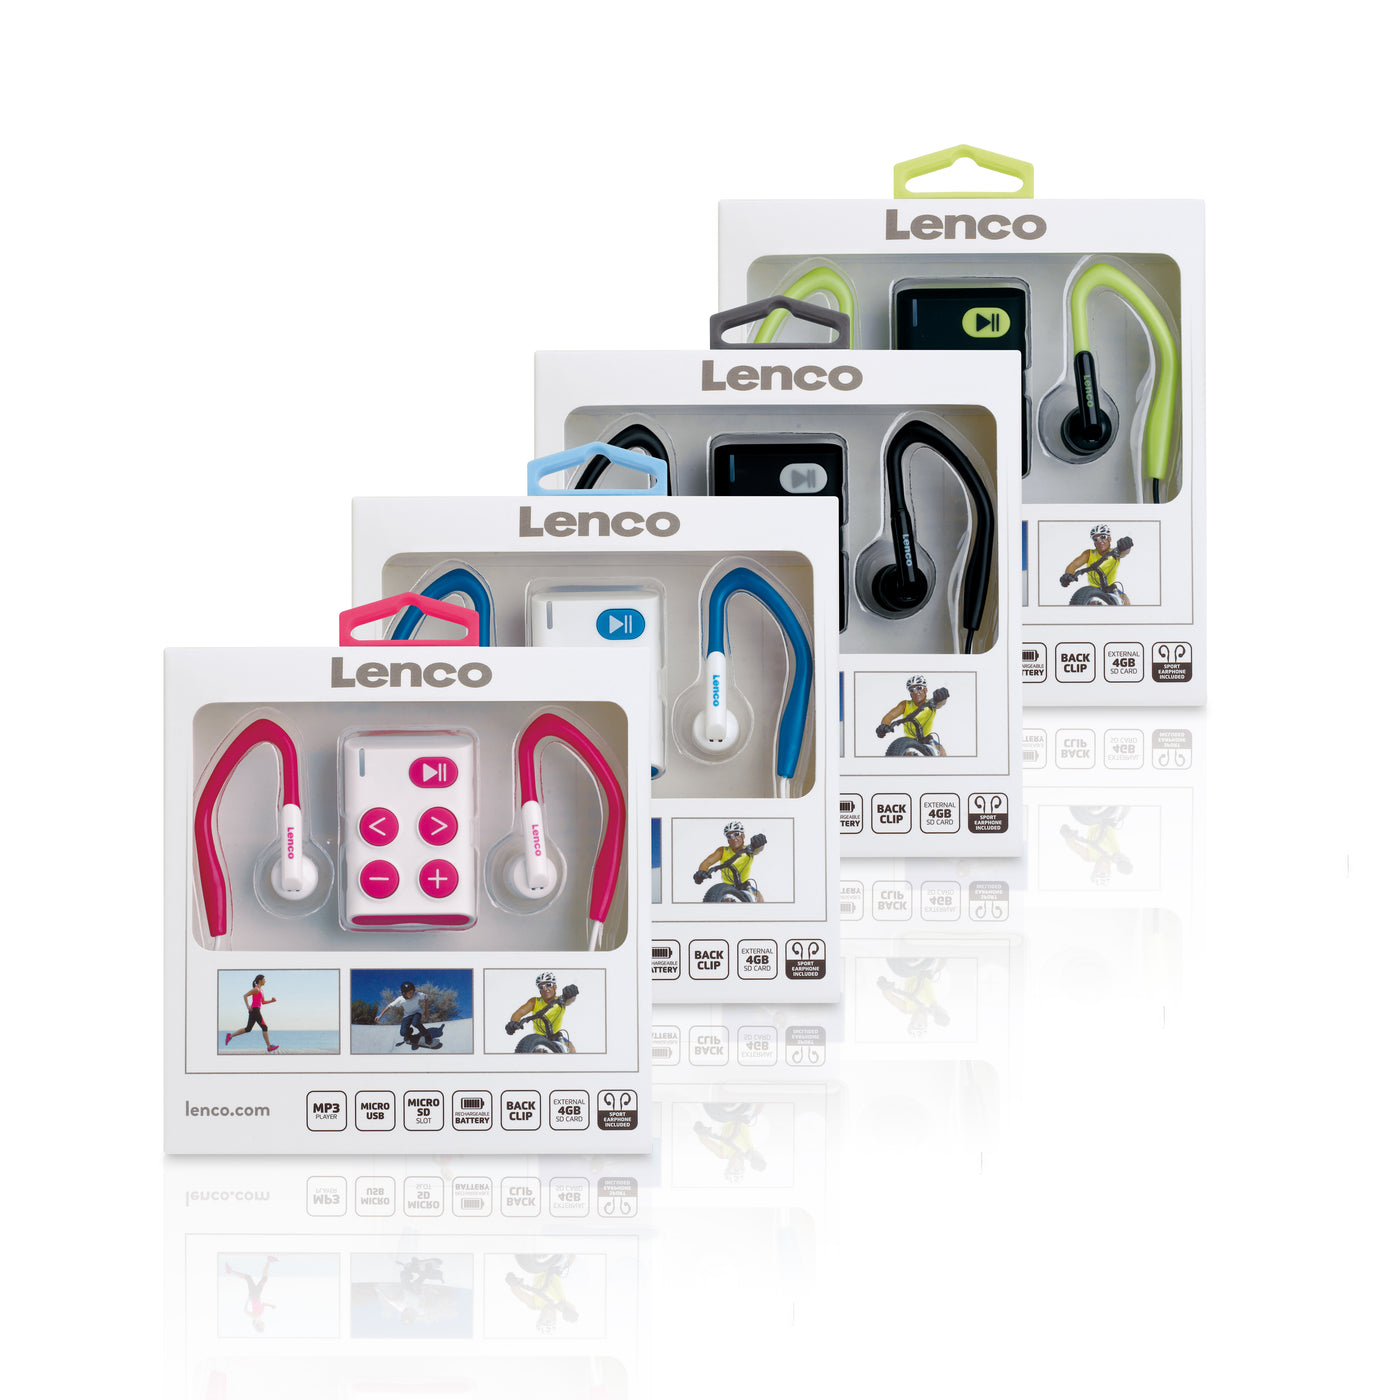 LENCO Xemio-154LM - Sport MP3 Player Incl. sport earbuds 4GB micro SD card - Lime